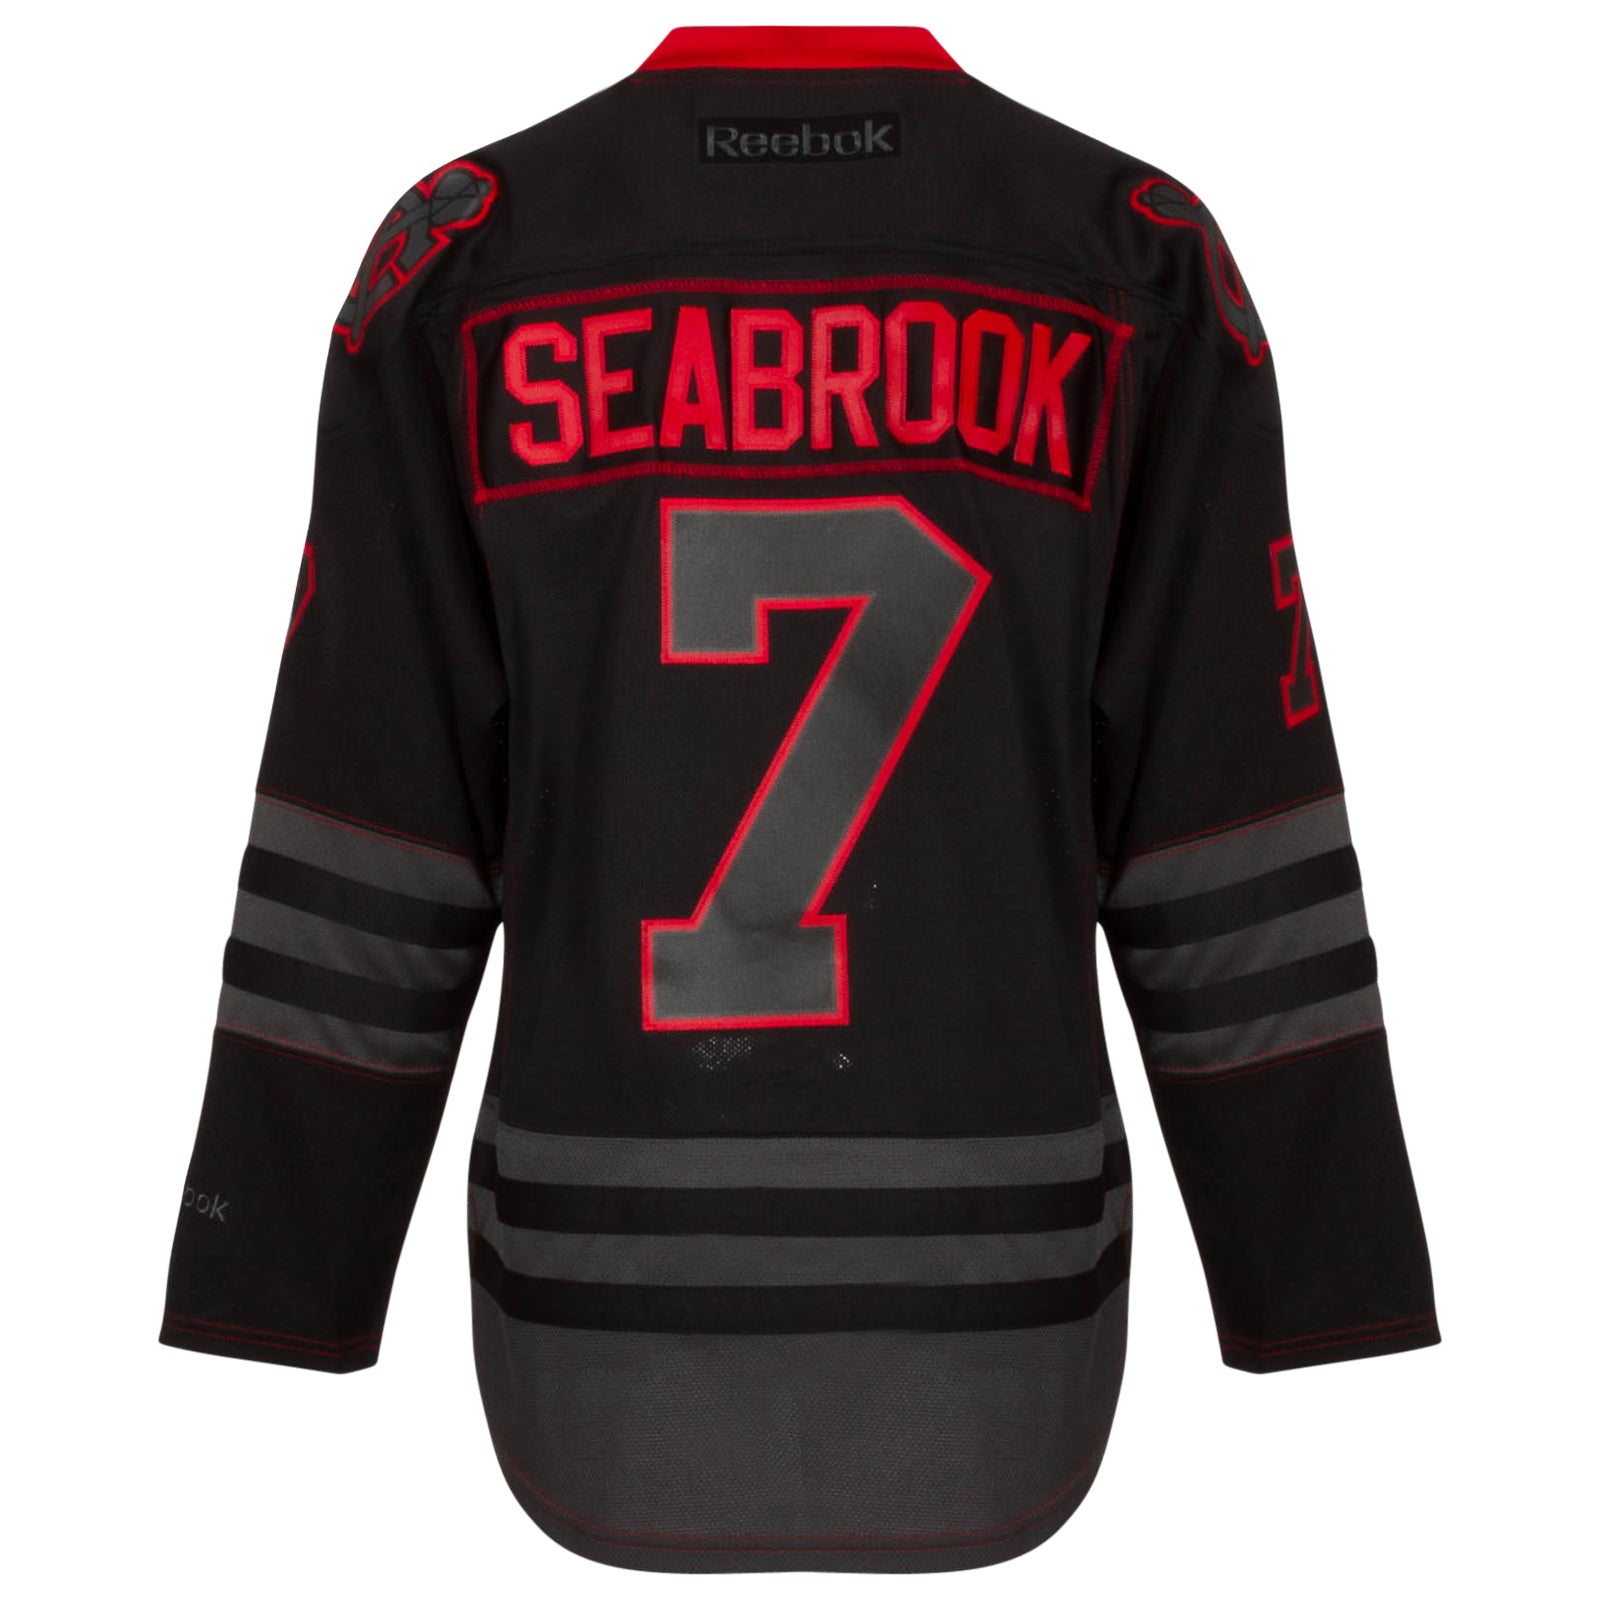 black and red blackhawks jersey